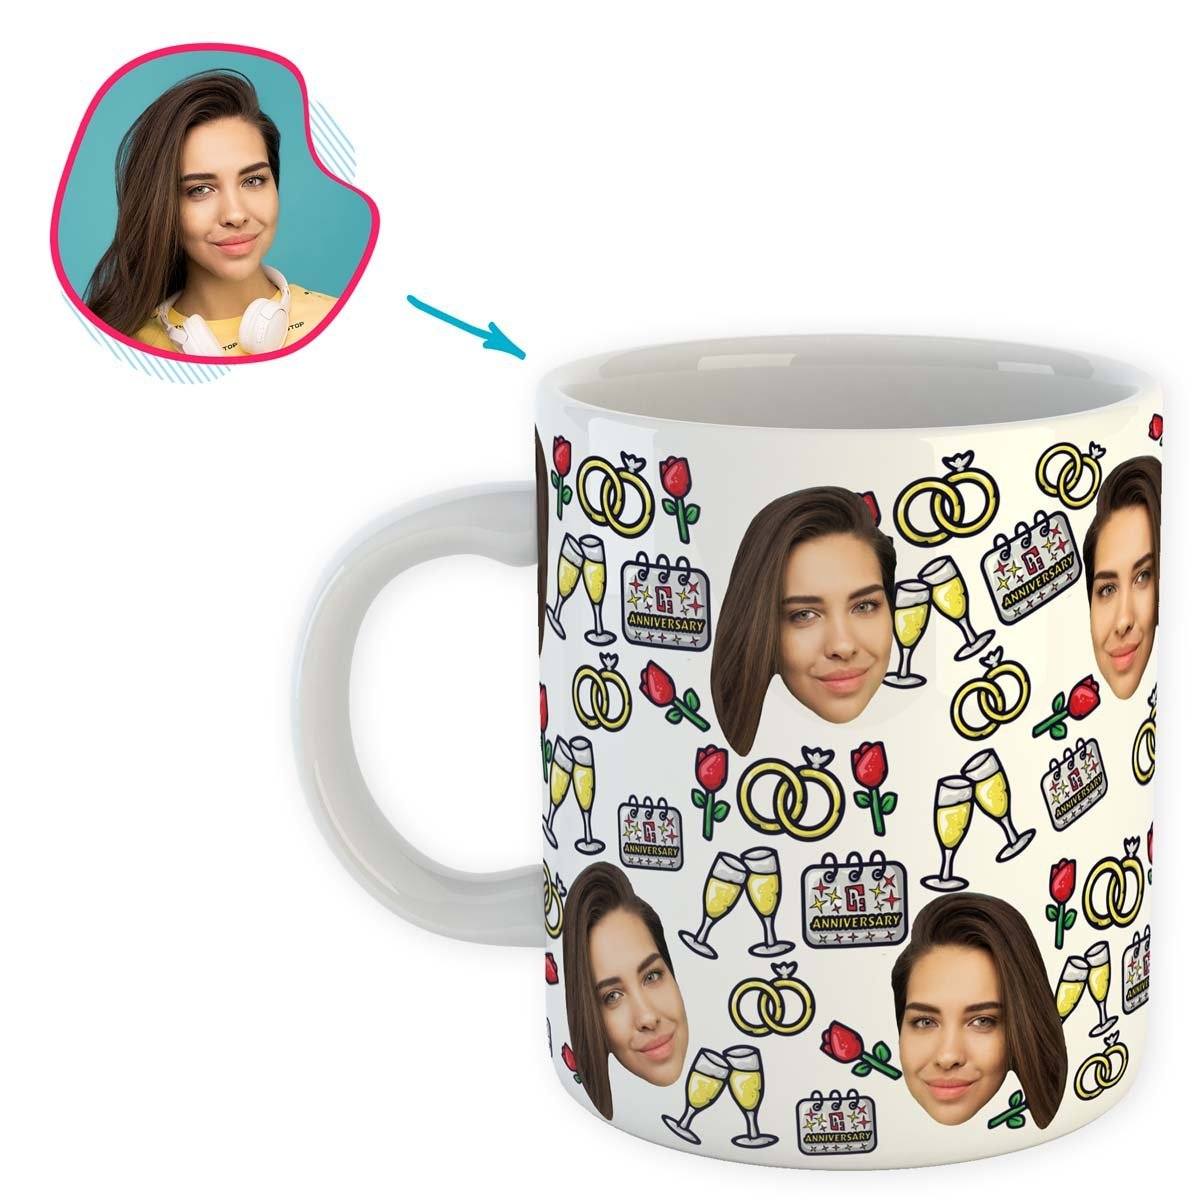 White Anniversary personalized mug with photo of face printed on it